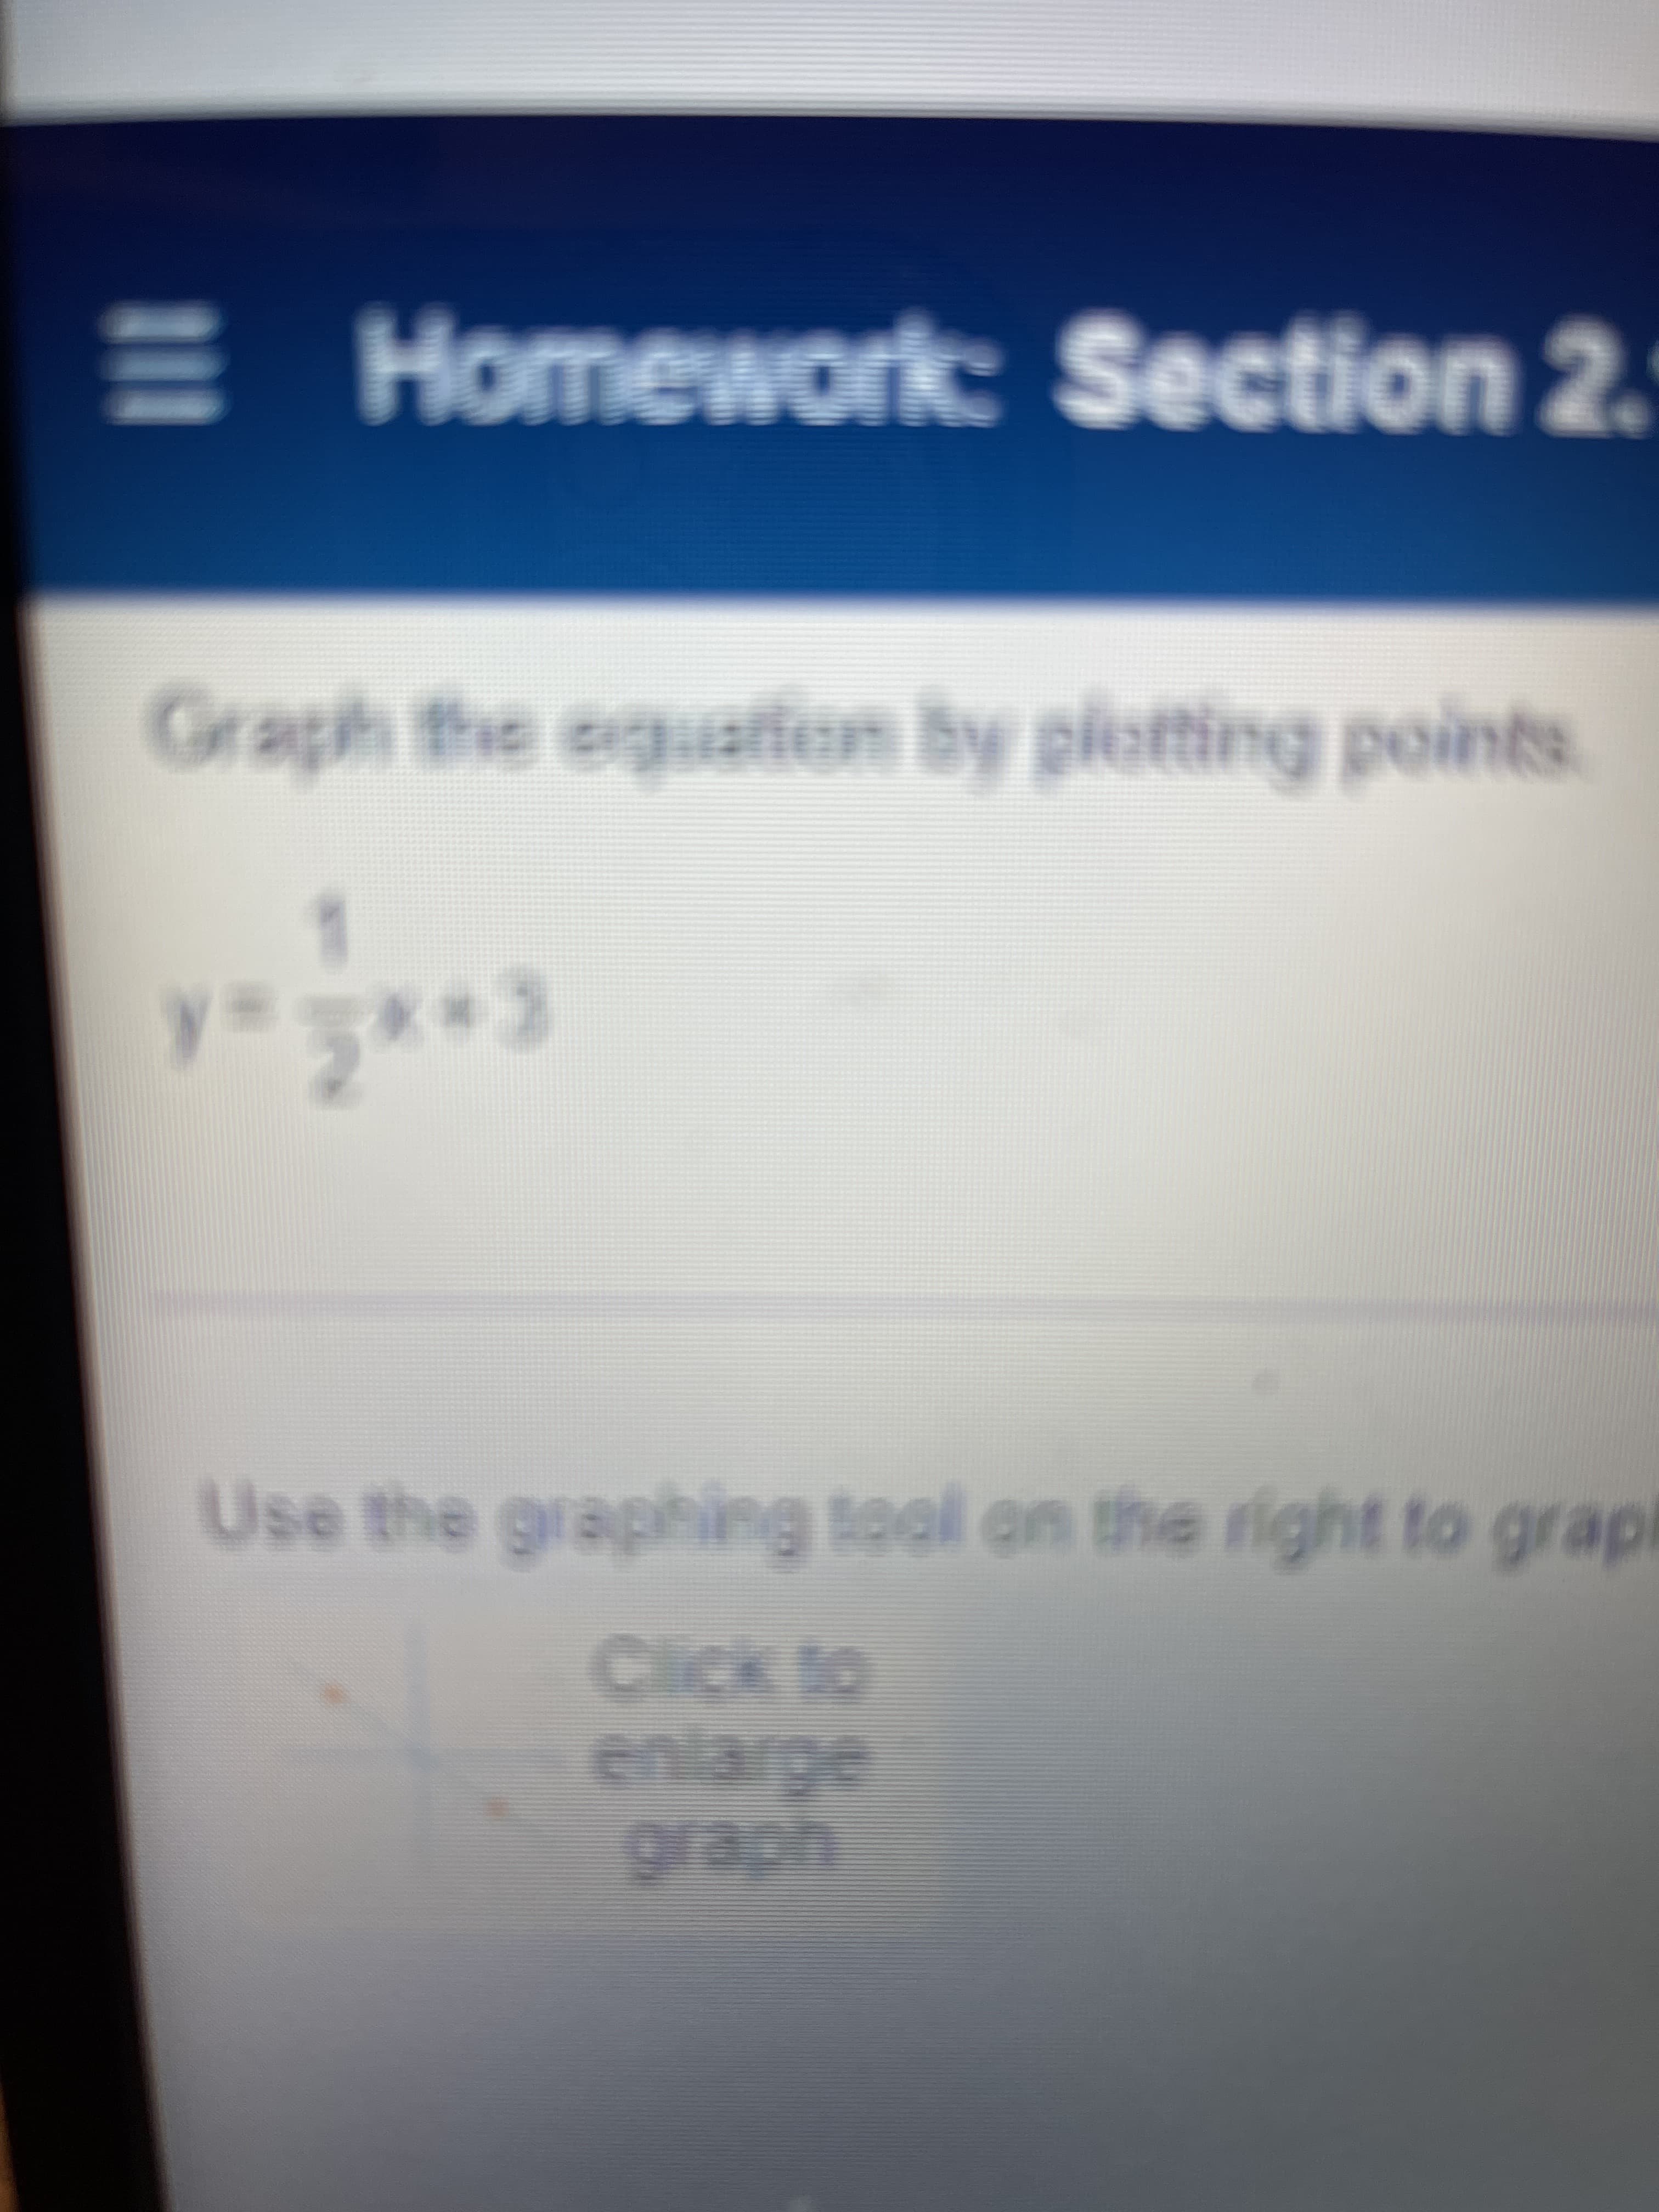 E Homework Section 2.
Graph the equation by plotting points
Use the graphing tool on the right to grapi
Click to
udej6
